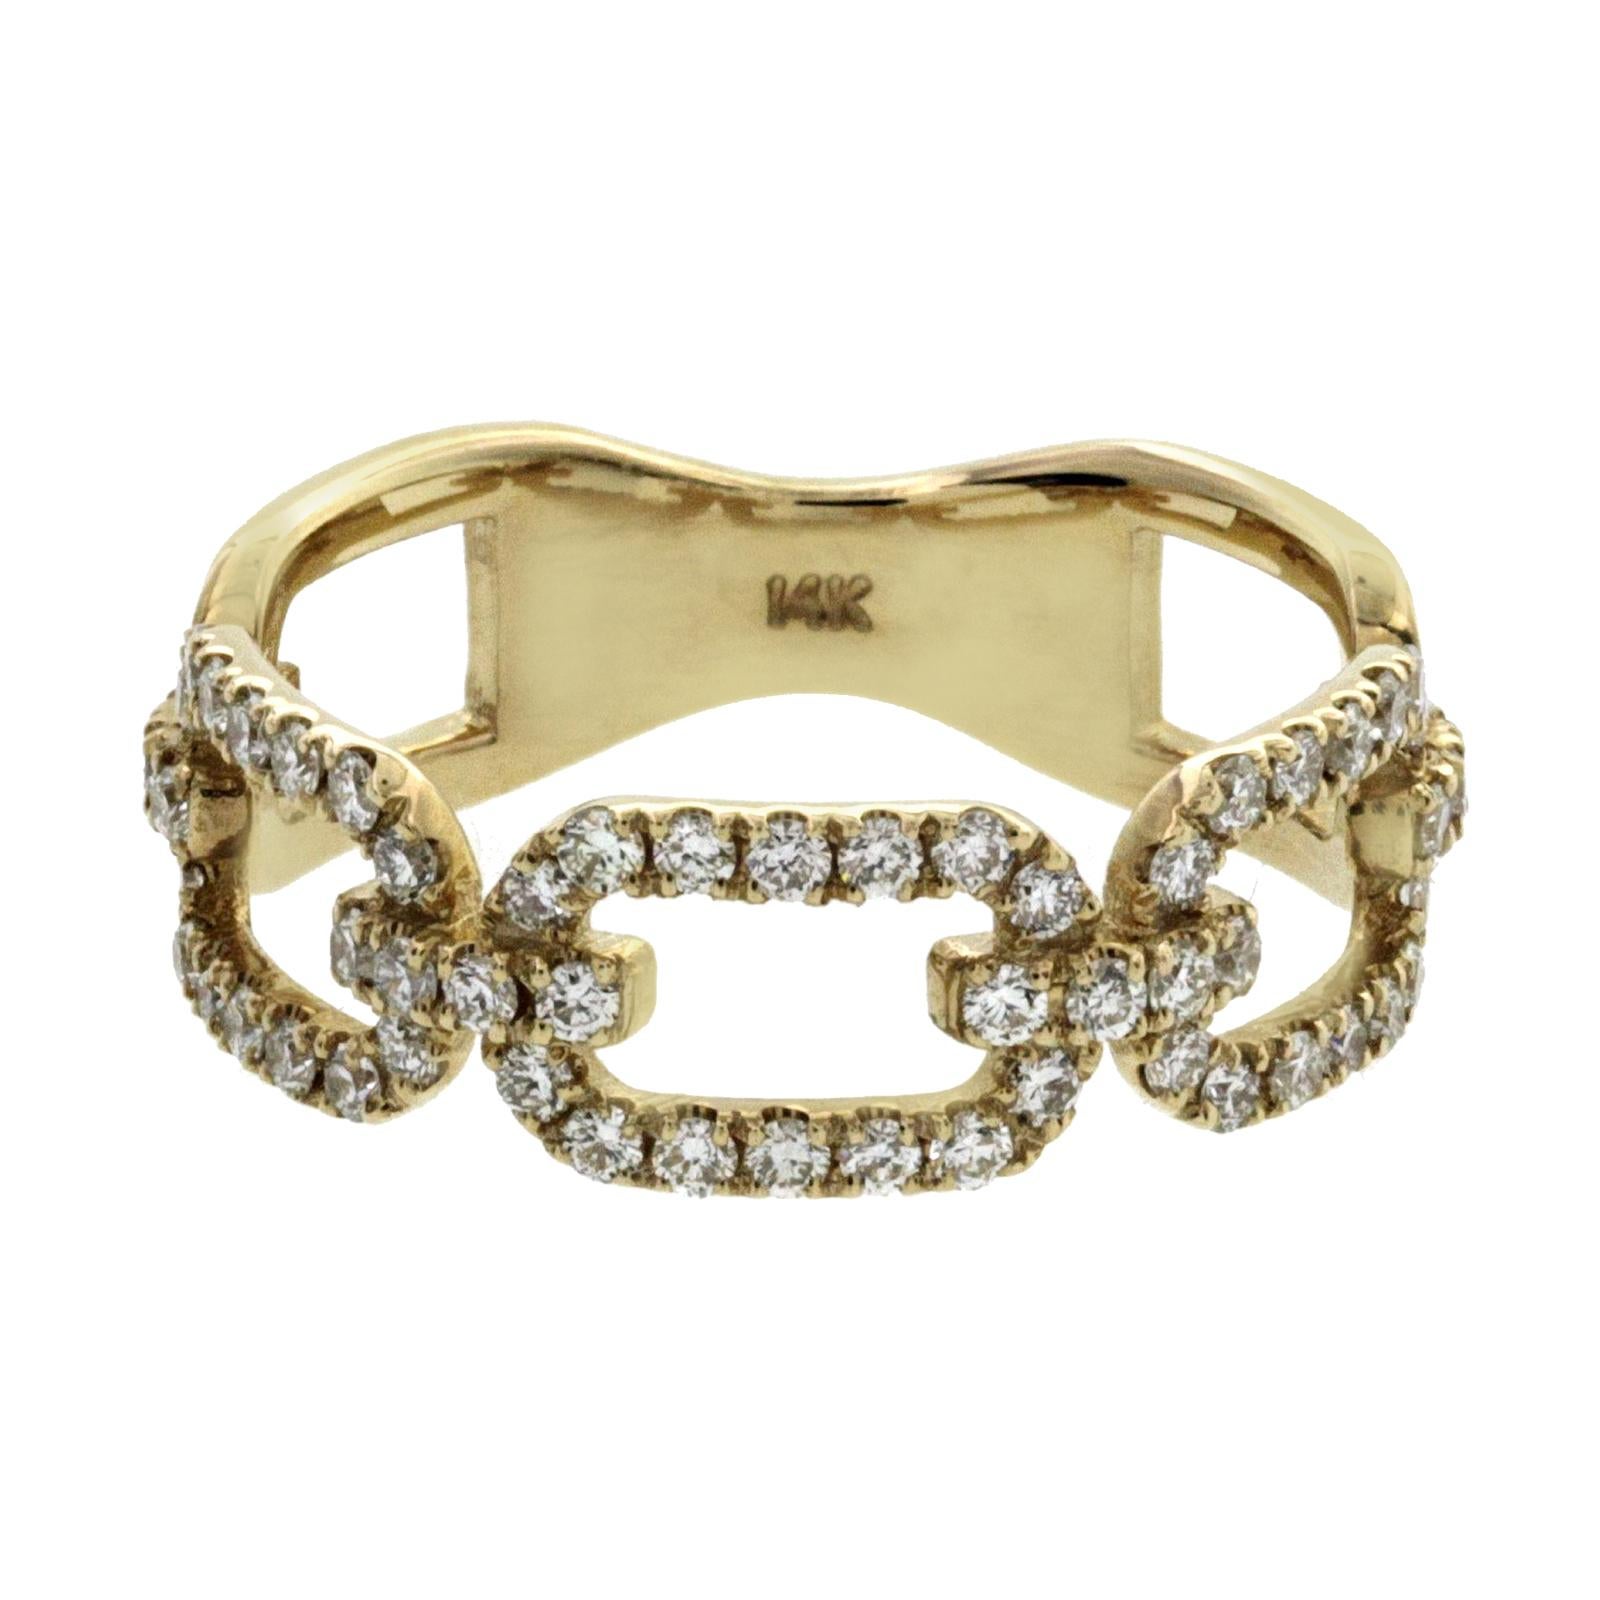 Fancy Link Chain 14 Karat Yellow Gold 0.58 Carat Diamonds Wedding Band Ring In Excellent Condition For Sale In Los Angeles, CA